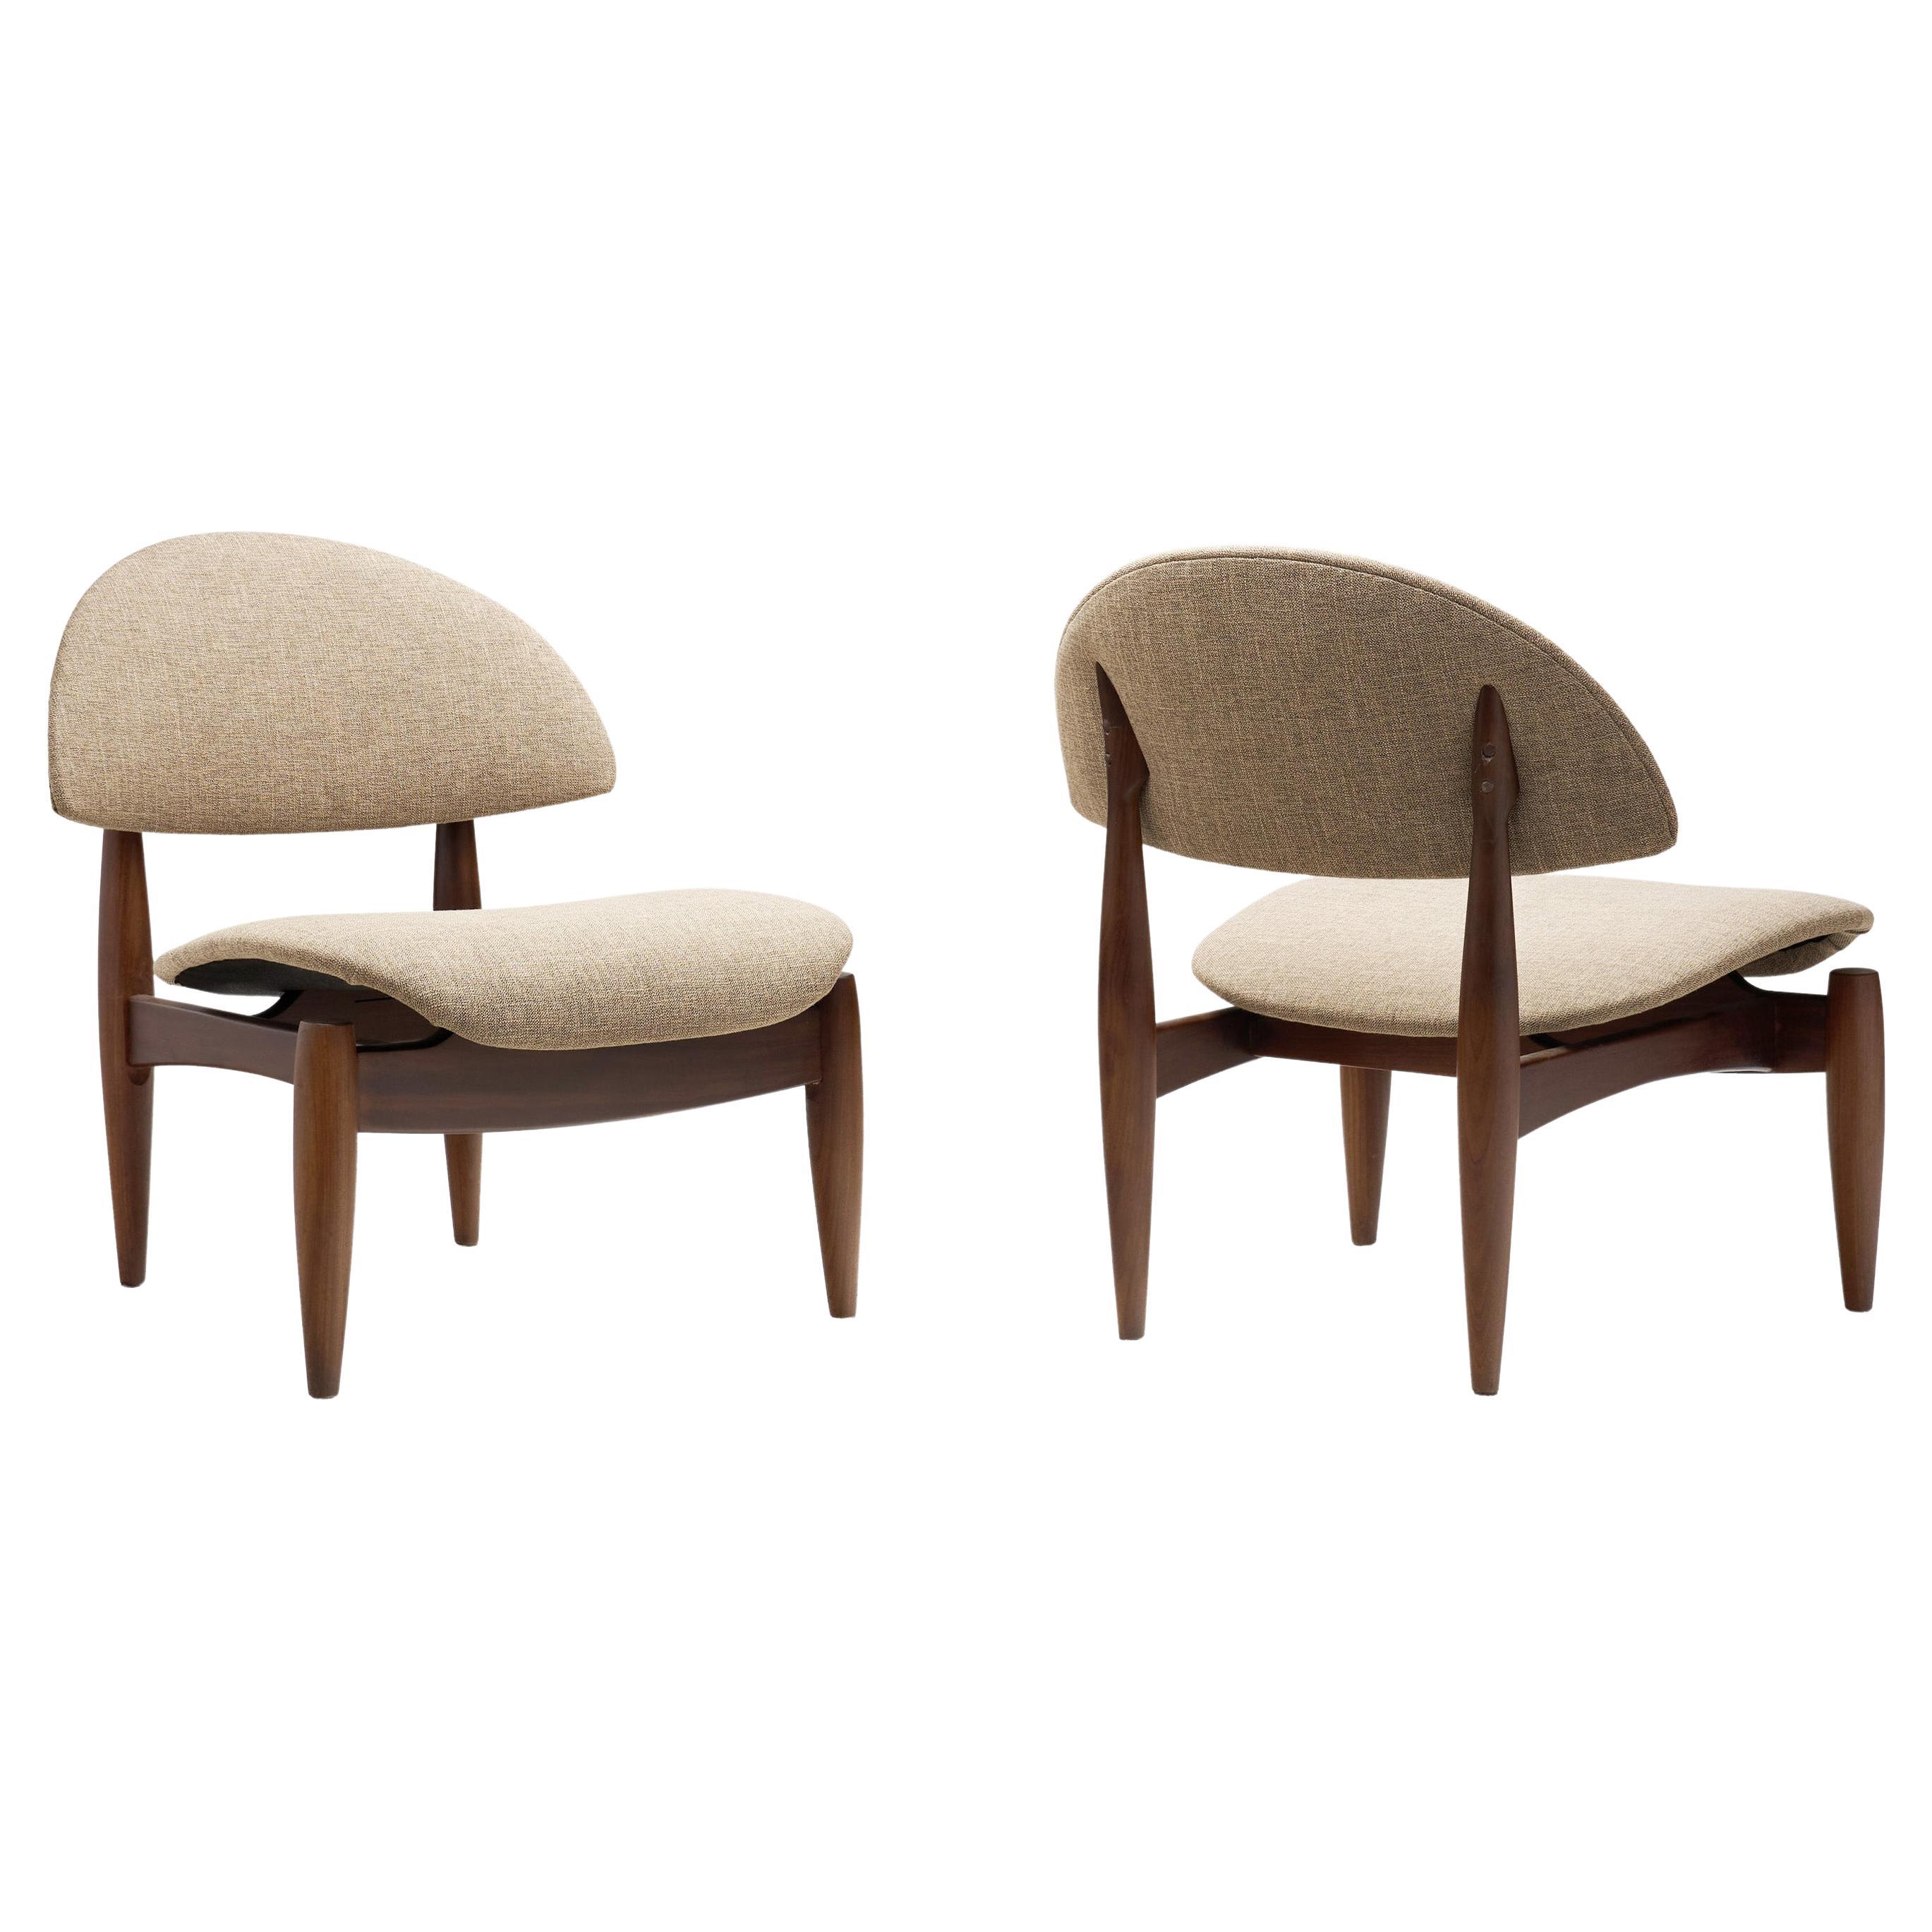 European Mid-Century Modern "Oyster" Chairs, Europe ca 1950s For Sale